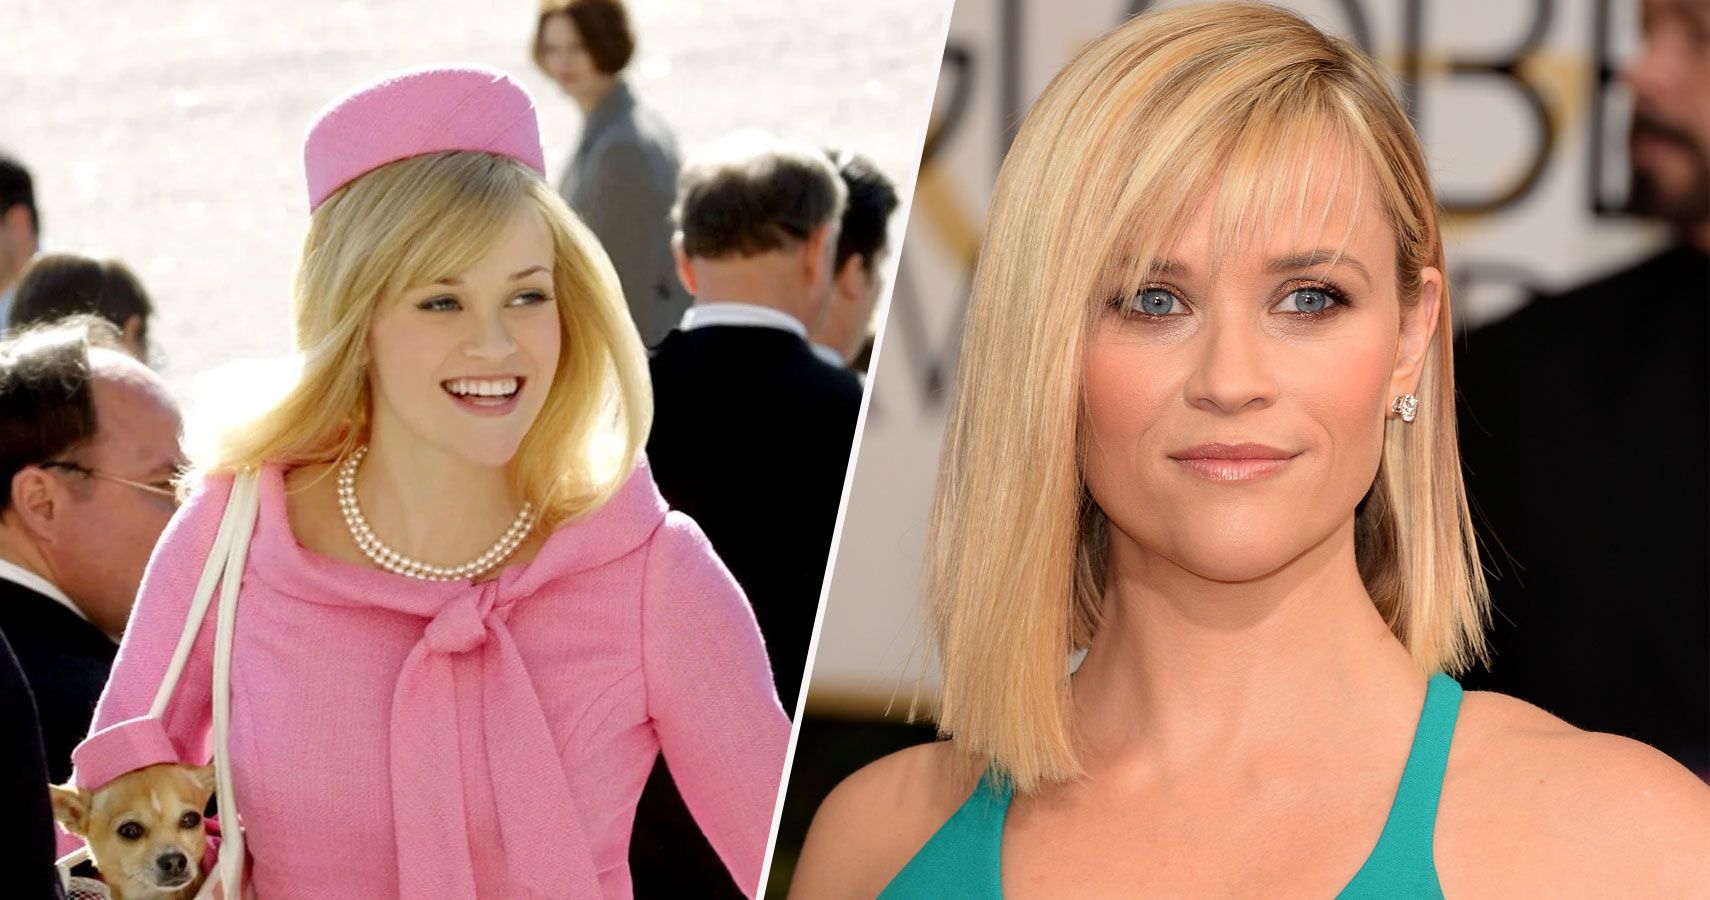 17 DIY Legally Blonde Costume Ideas for Halloween